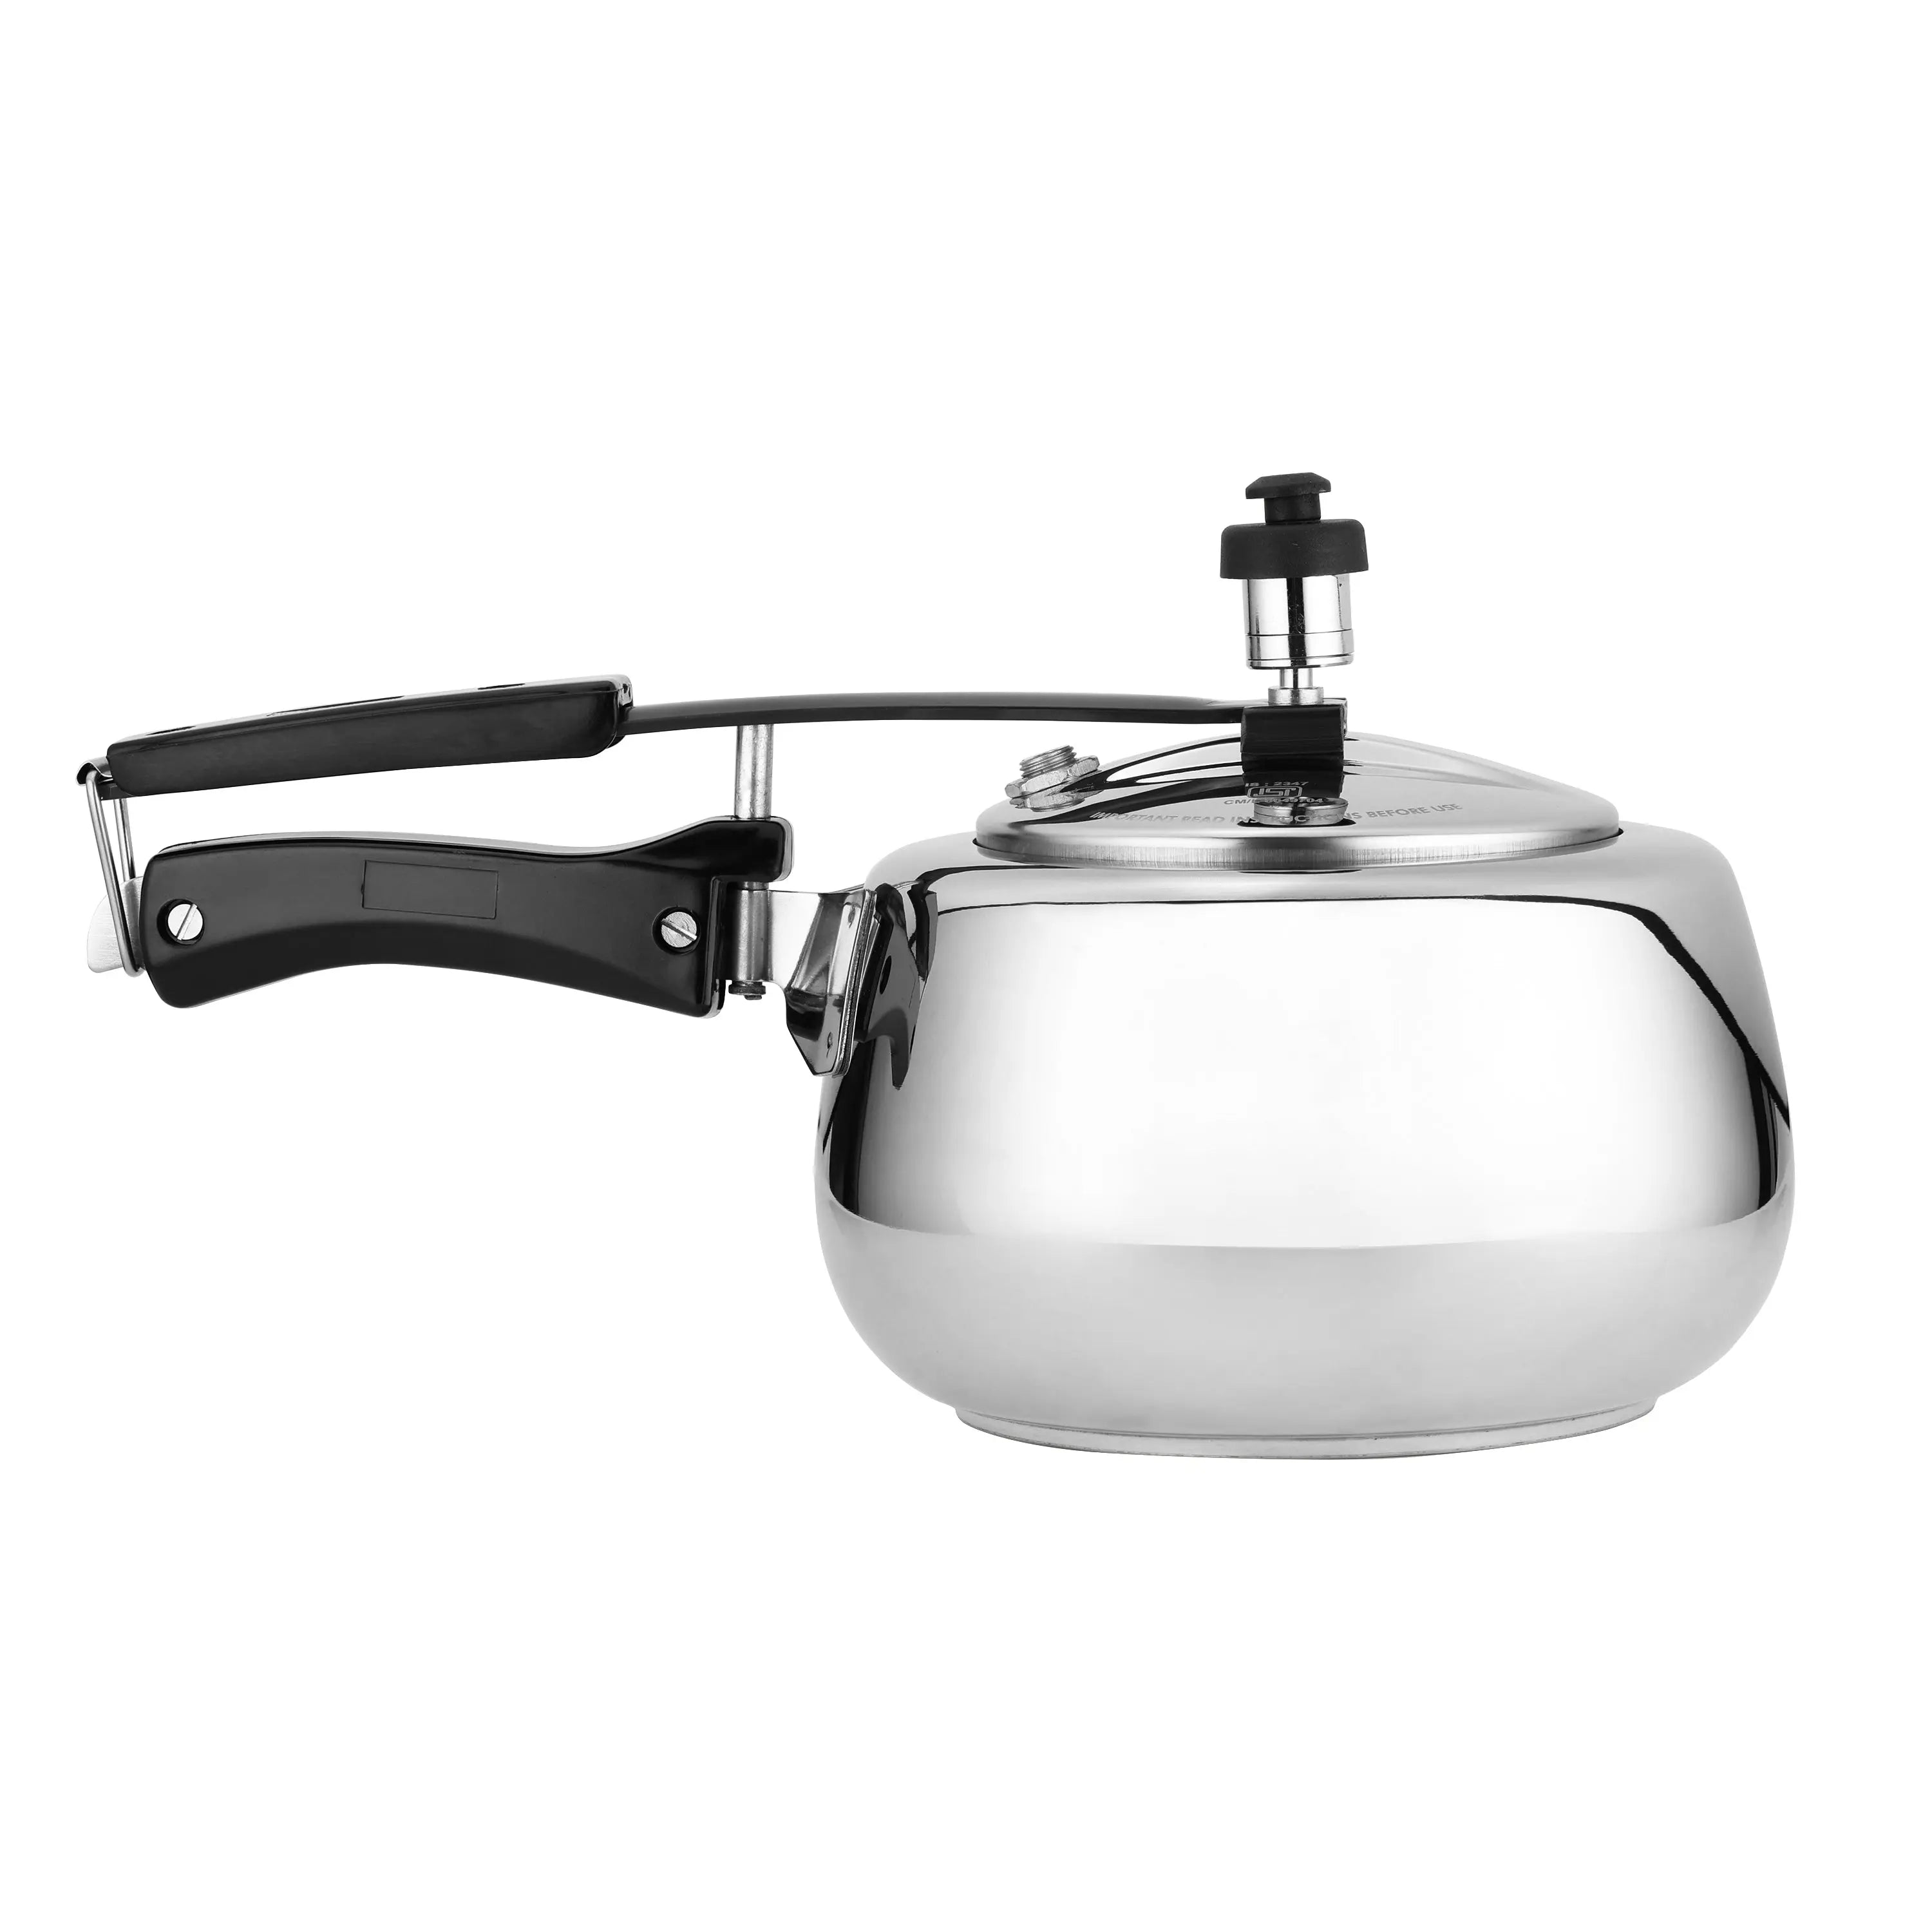 STAINLESS STEEL COOKER - CROCKERY WALA AND COMPANY 